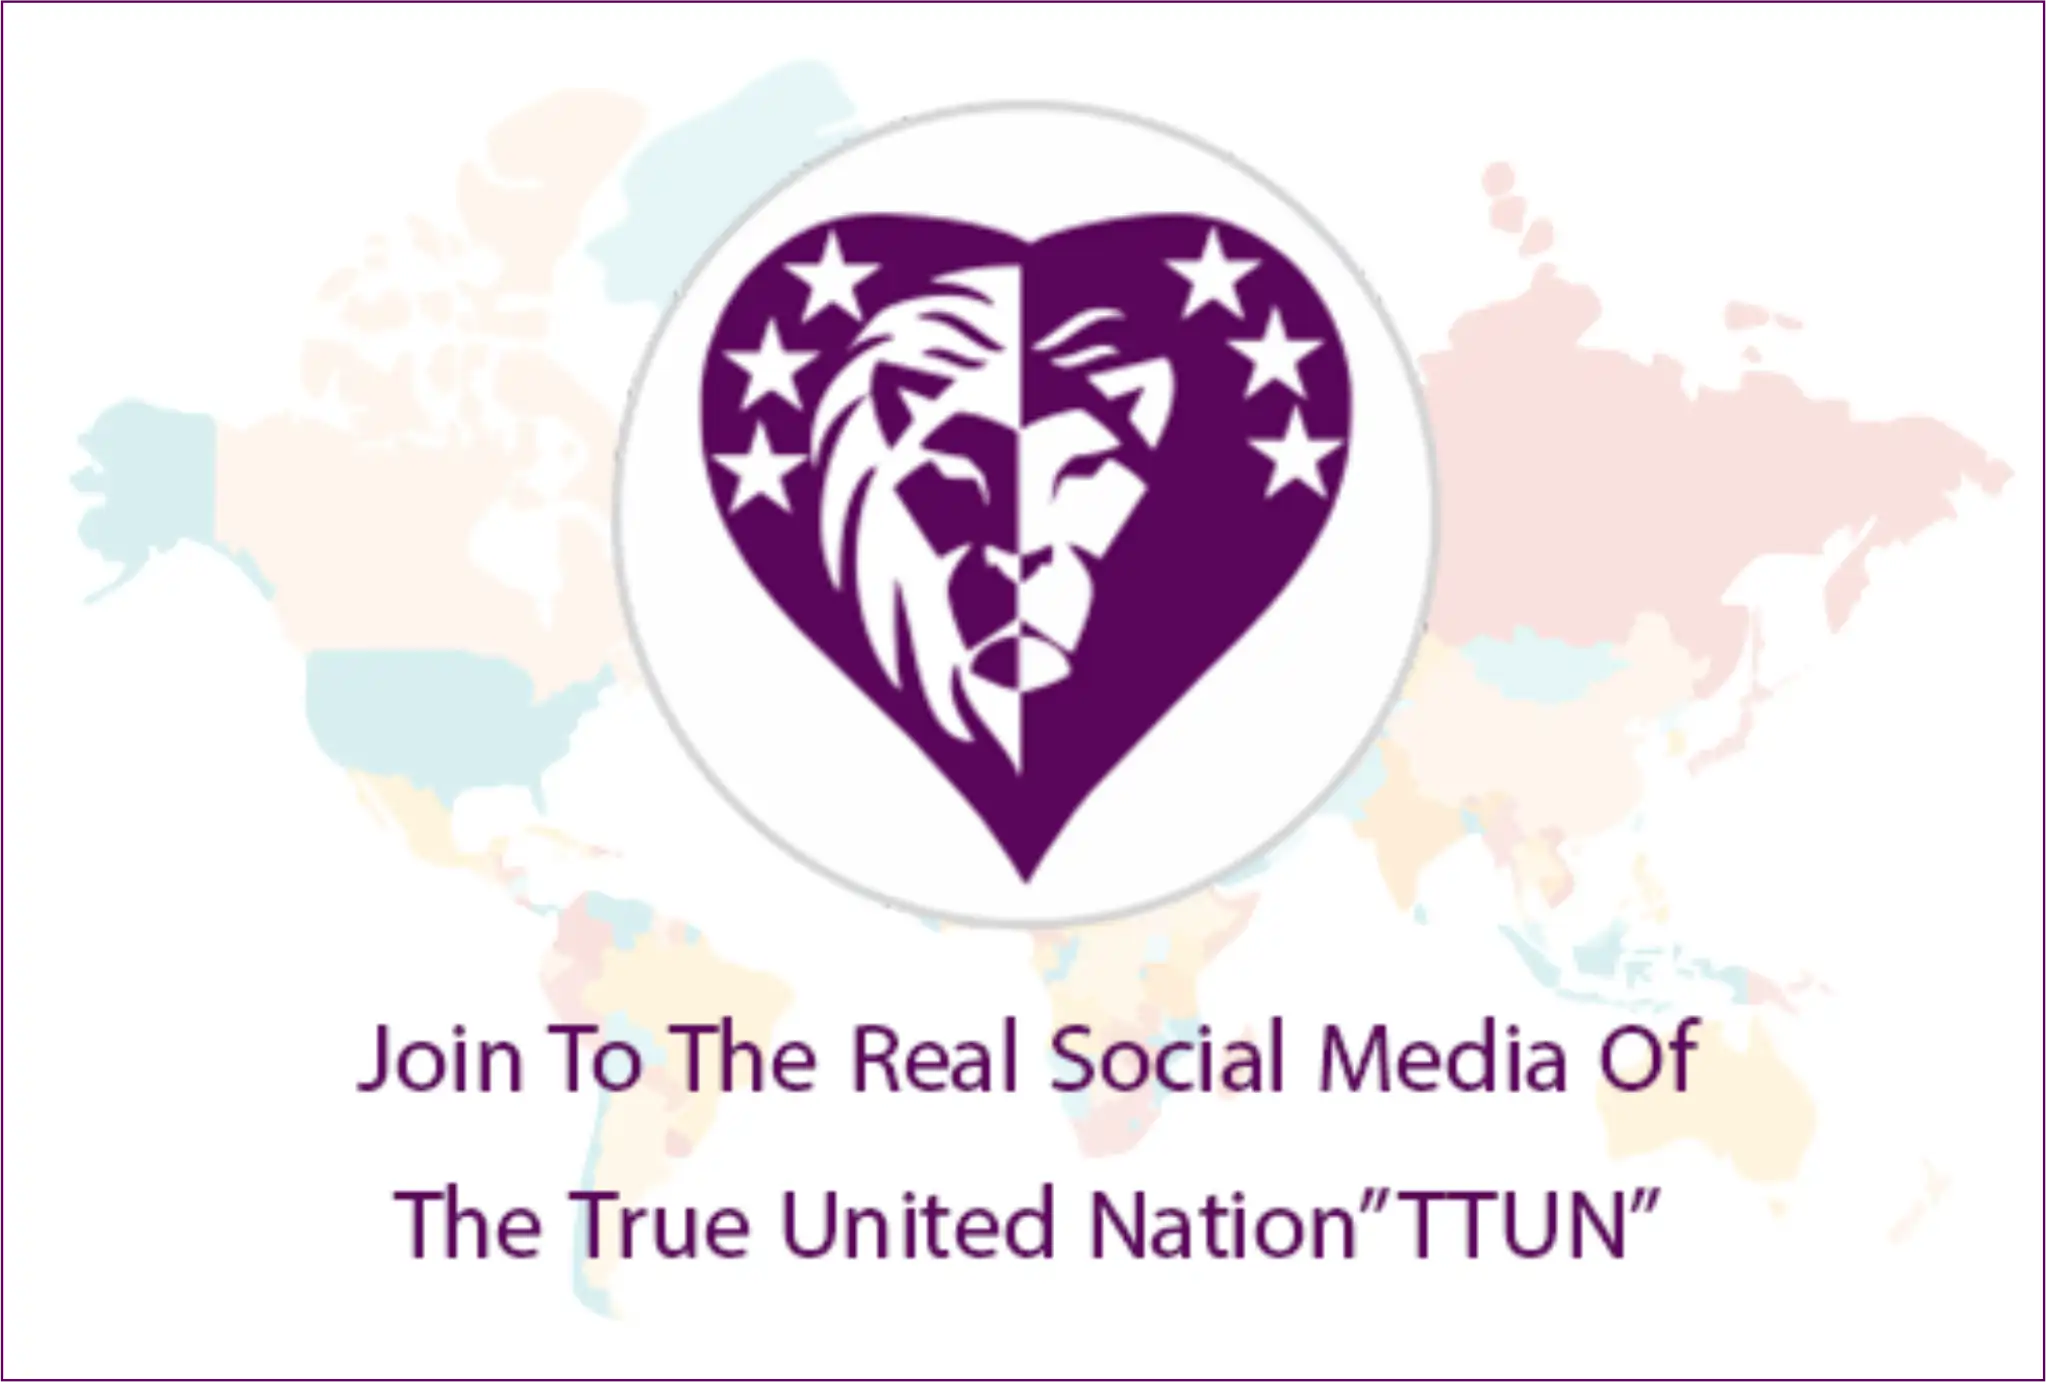 Join To the Real Social Media Of The True United Nation